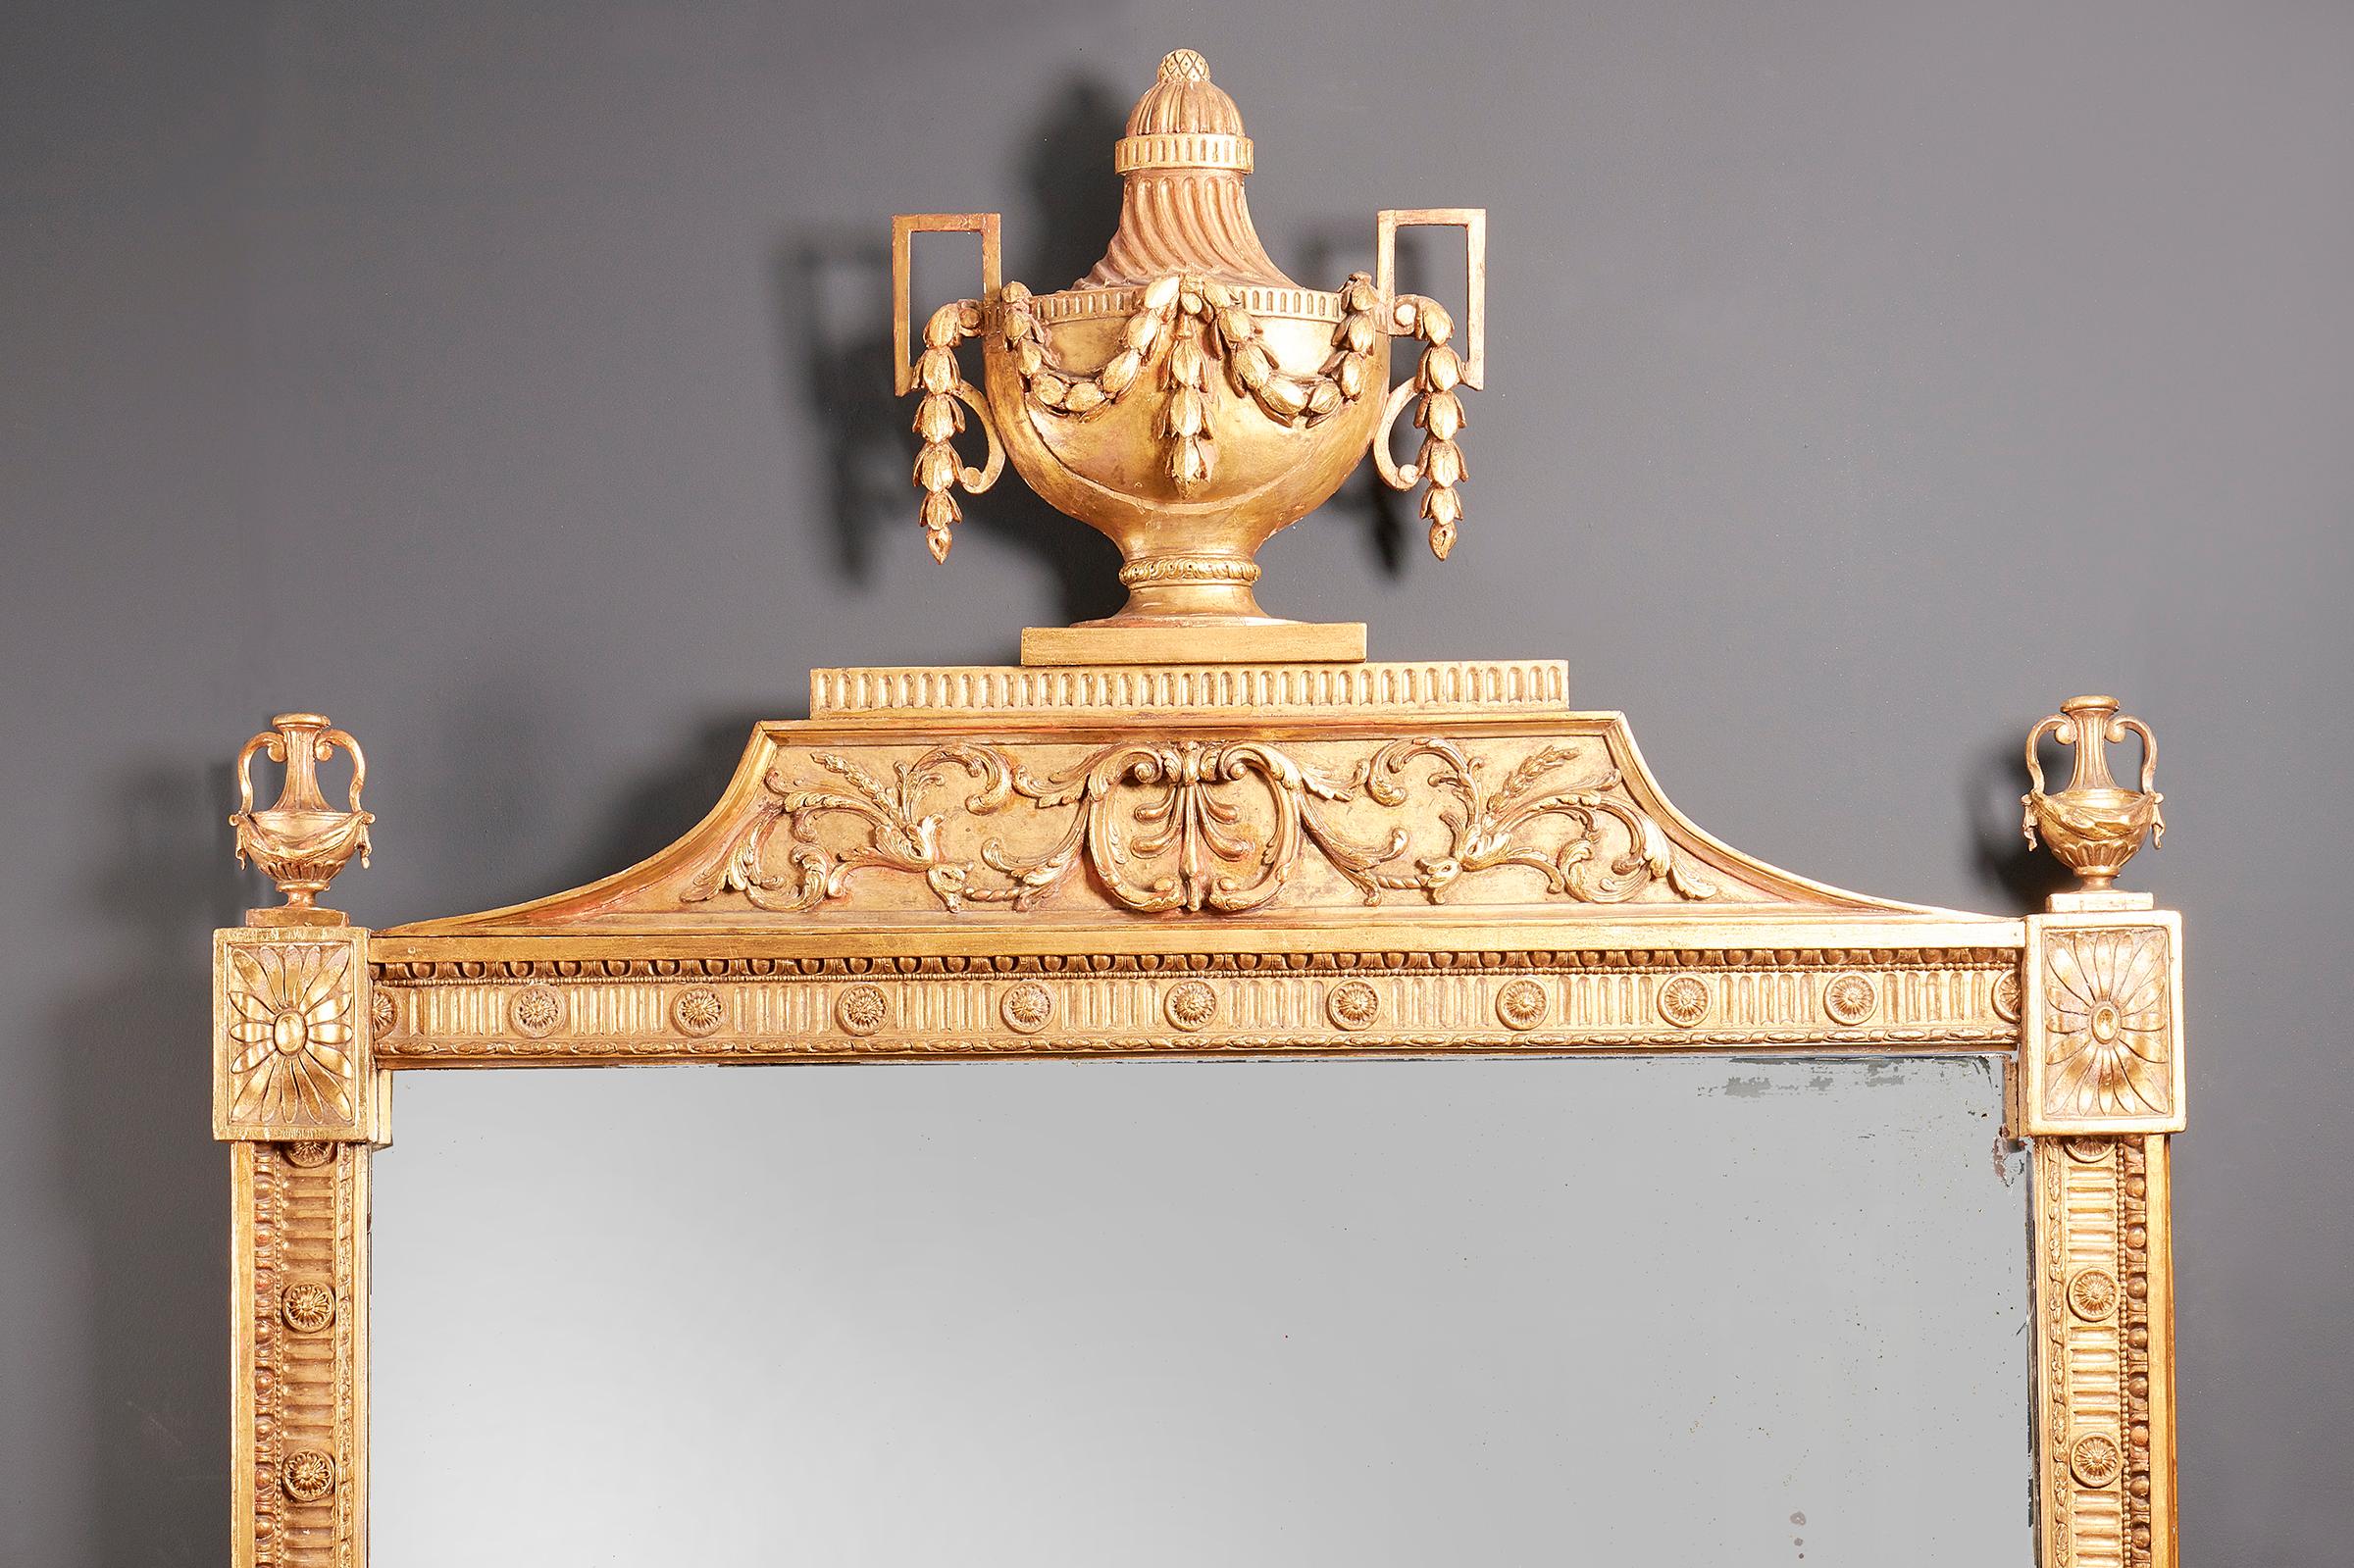 A fine George III gilt wood mirror, circa 1775-1800, of grand size, the frame with a flower head in each corner, the upper corners surmounted by classical urns, the top with a large classical urn over an acanthus frieze.